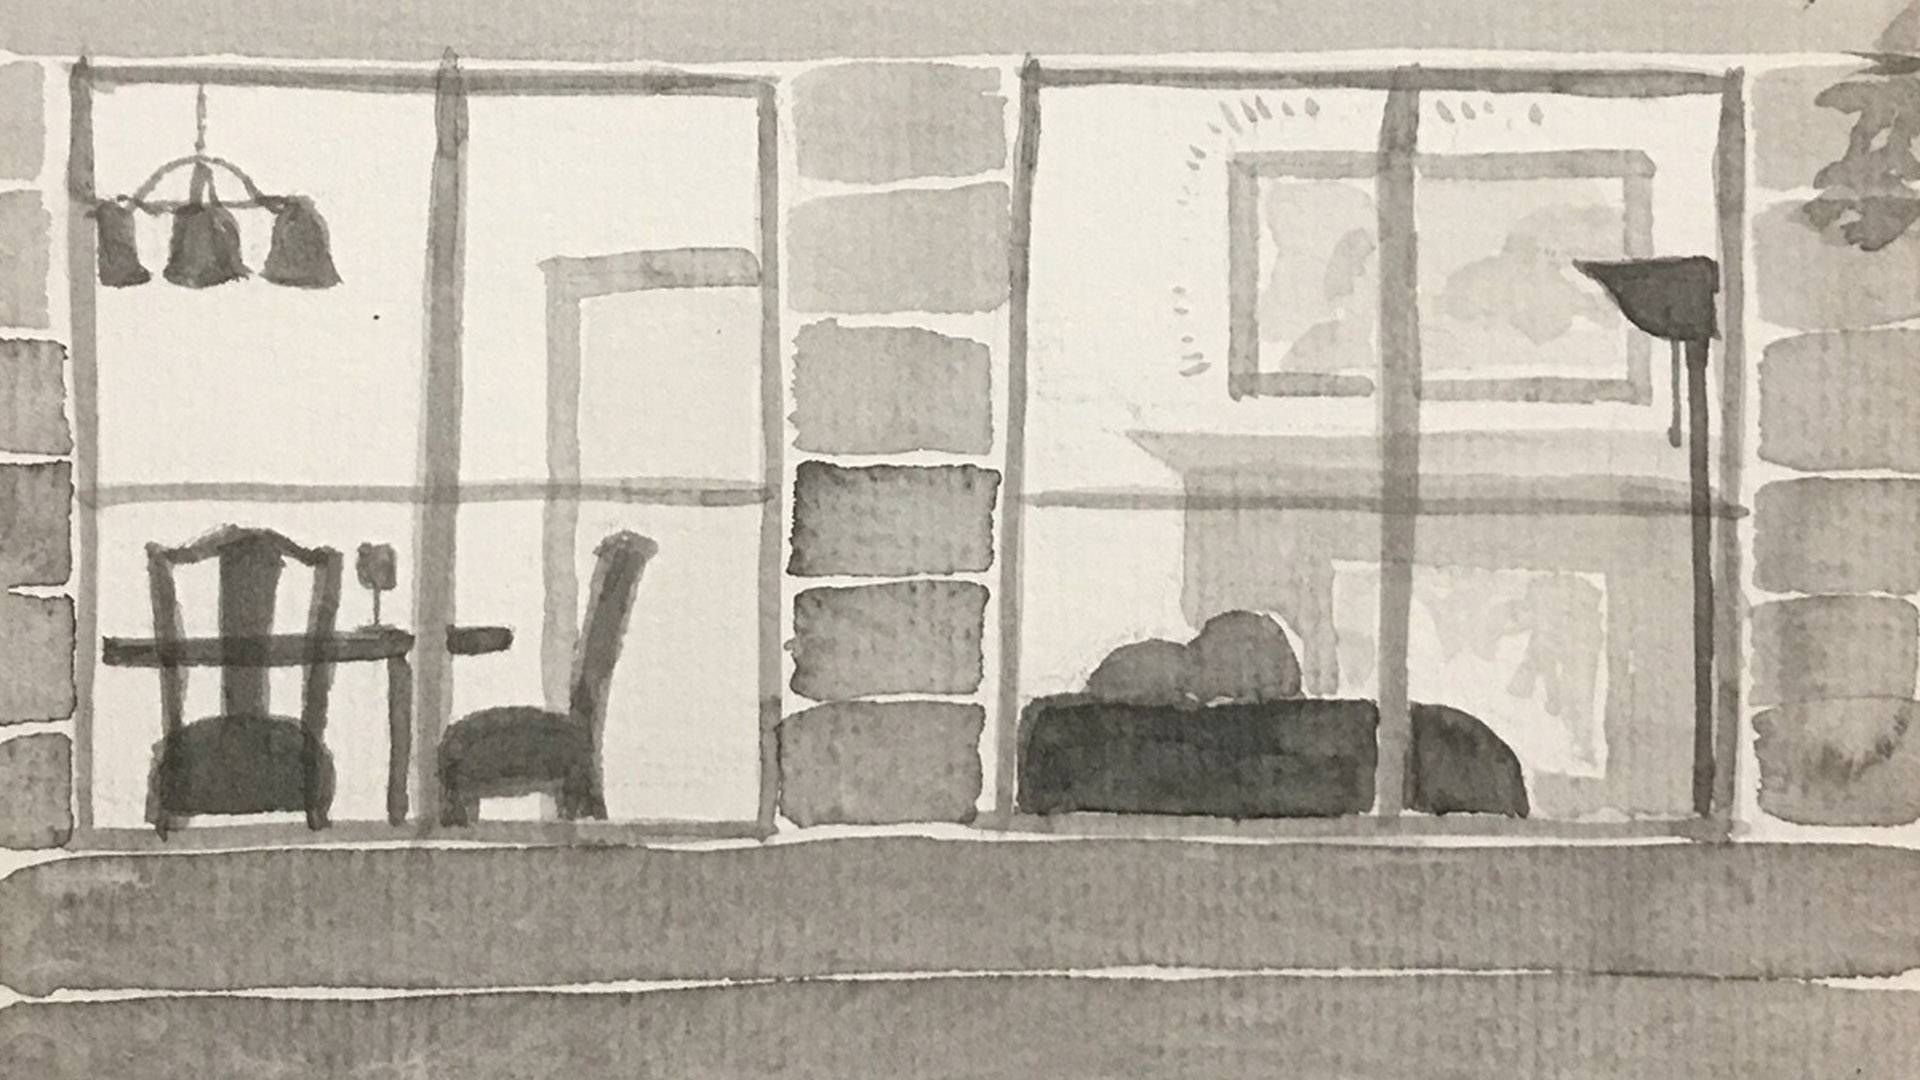 Ink drawing of windows in a house